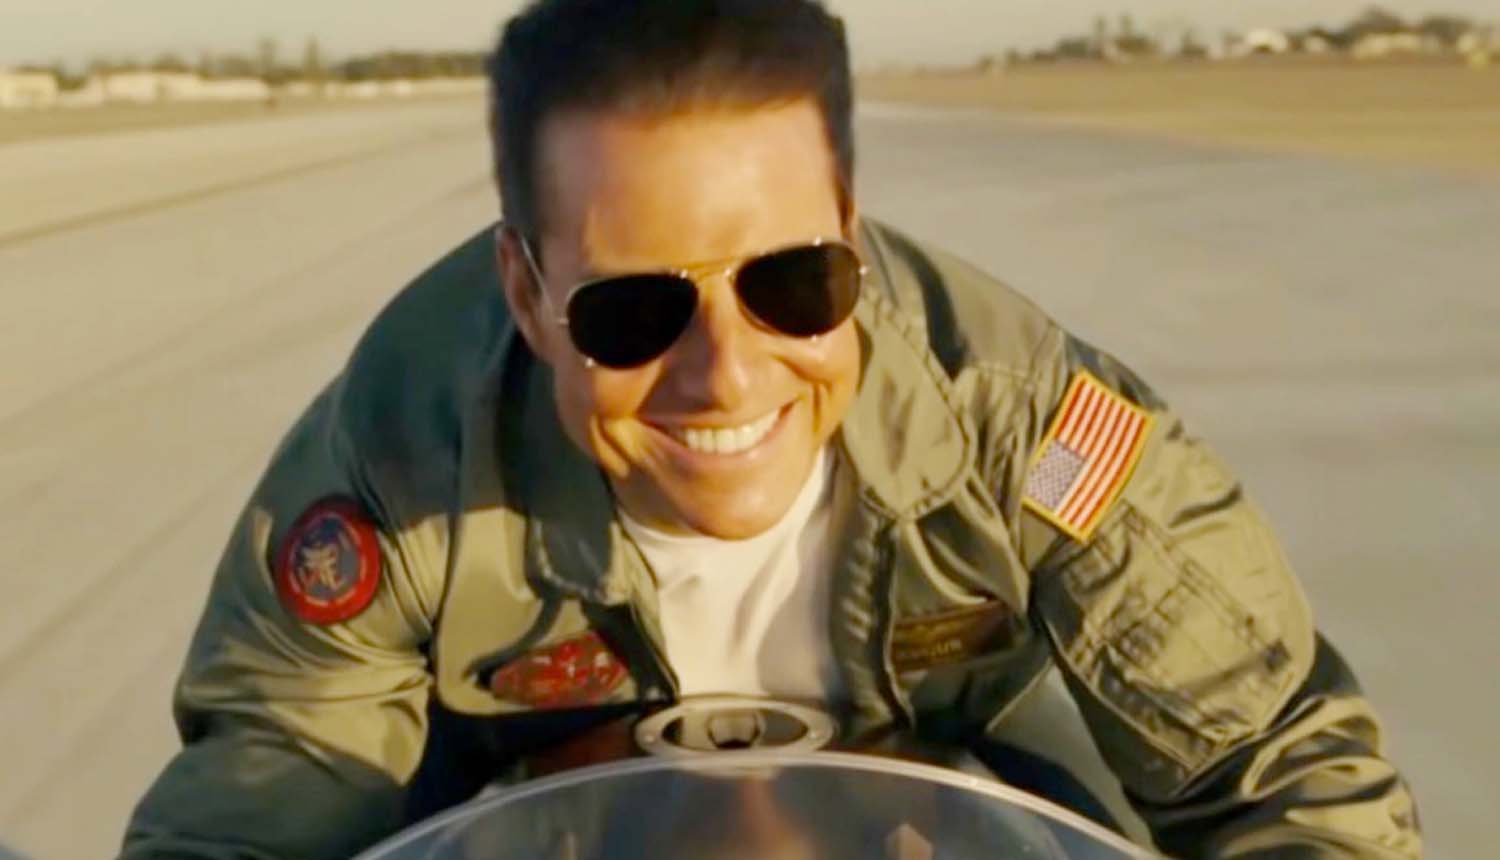 How to Watch 'Top Gun: Maverick' Online: When Does It Hit Streaming?